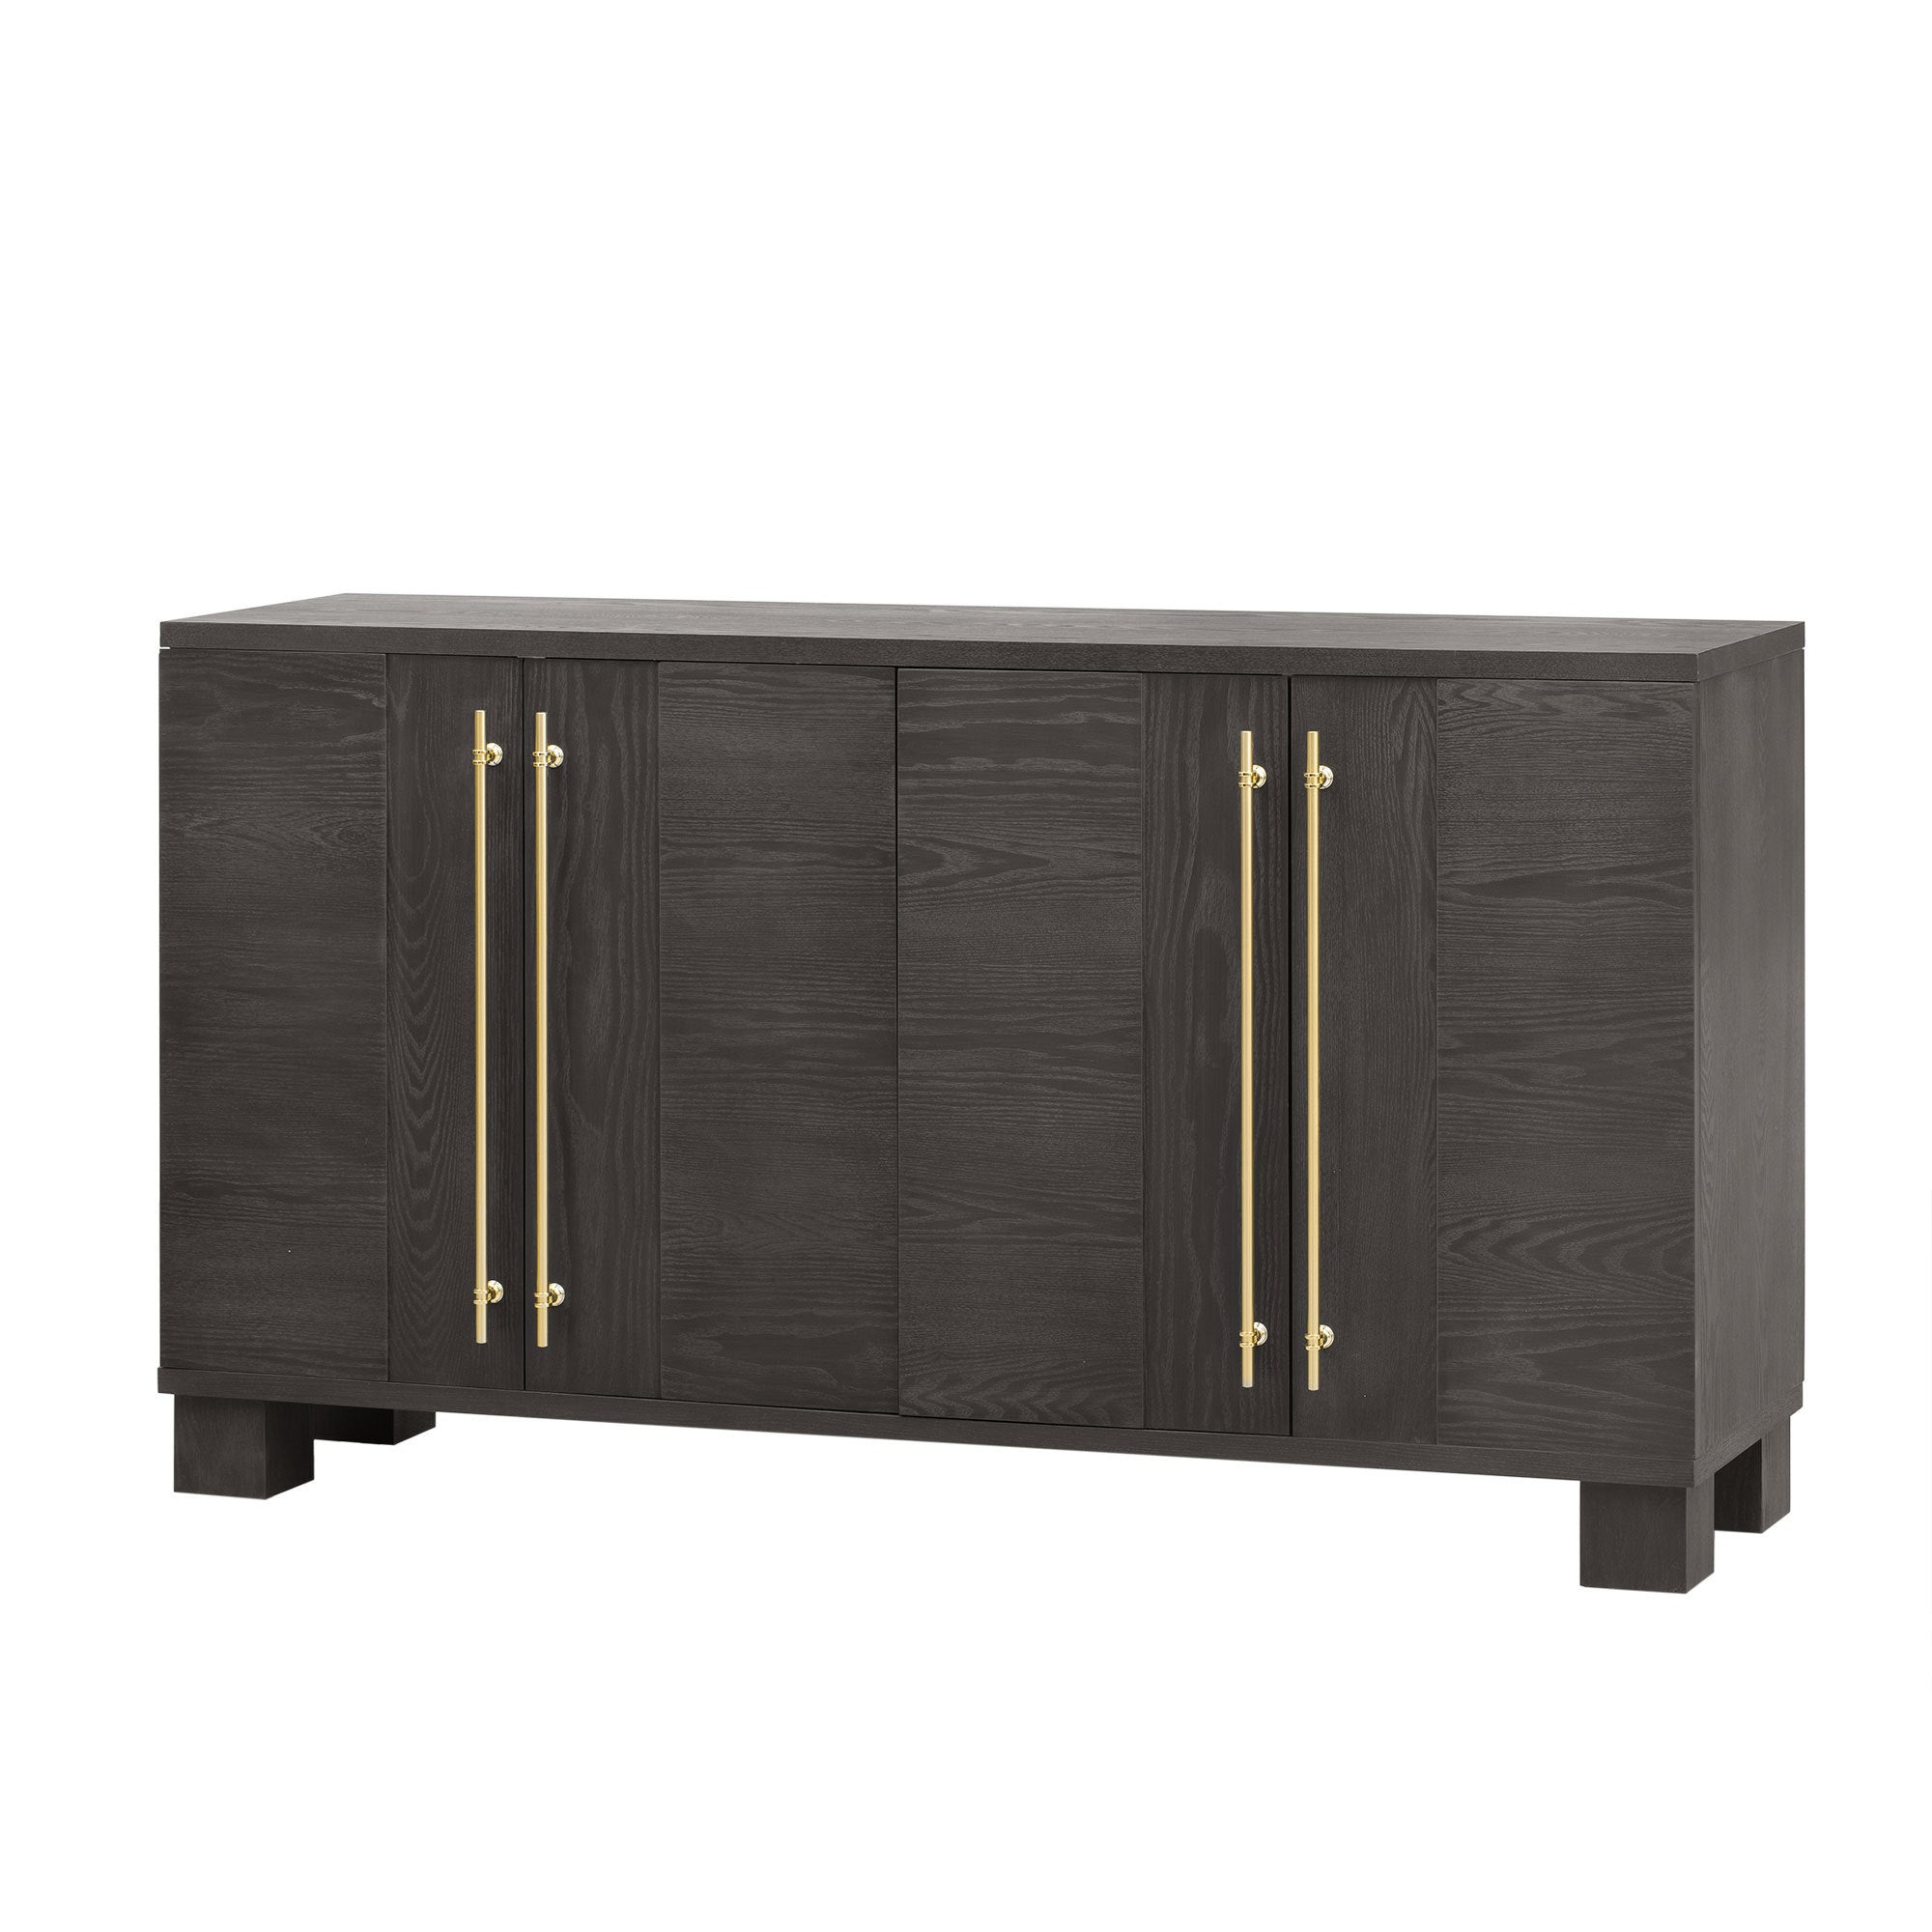 CONSOLE TABLE/ACCENT CABINET/SIDEBOARD - Ross HomeGoods